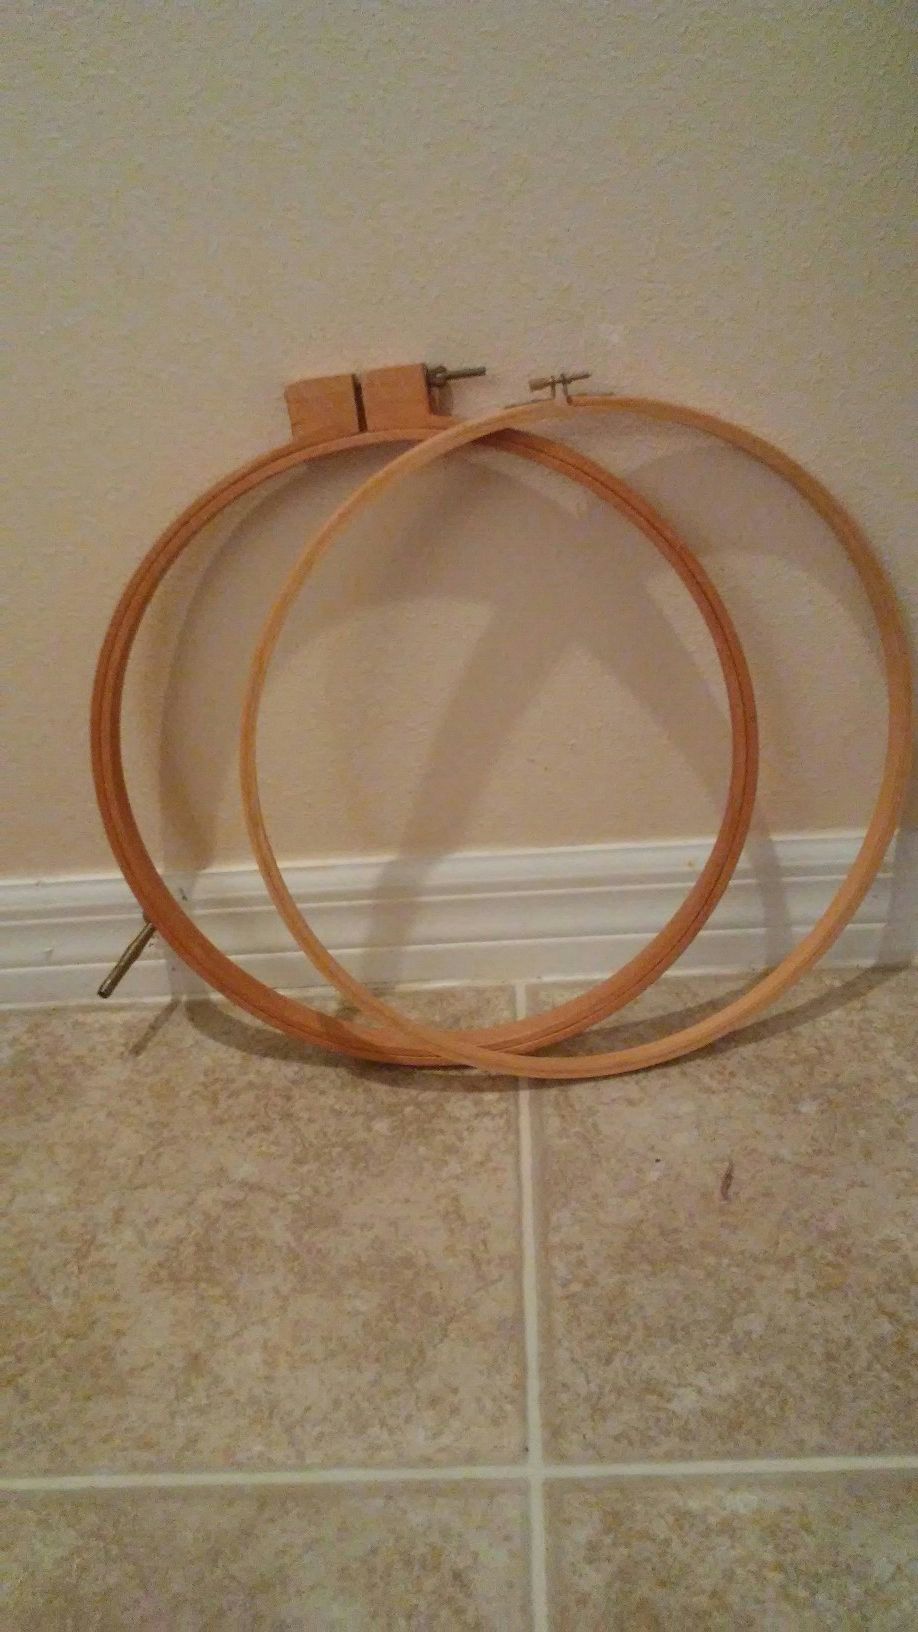 Wooden embroidery hoops